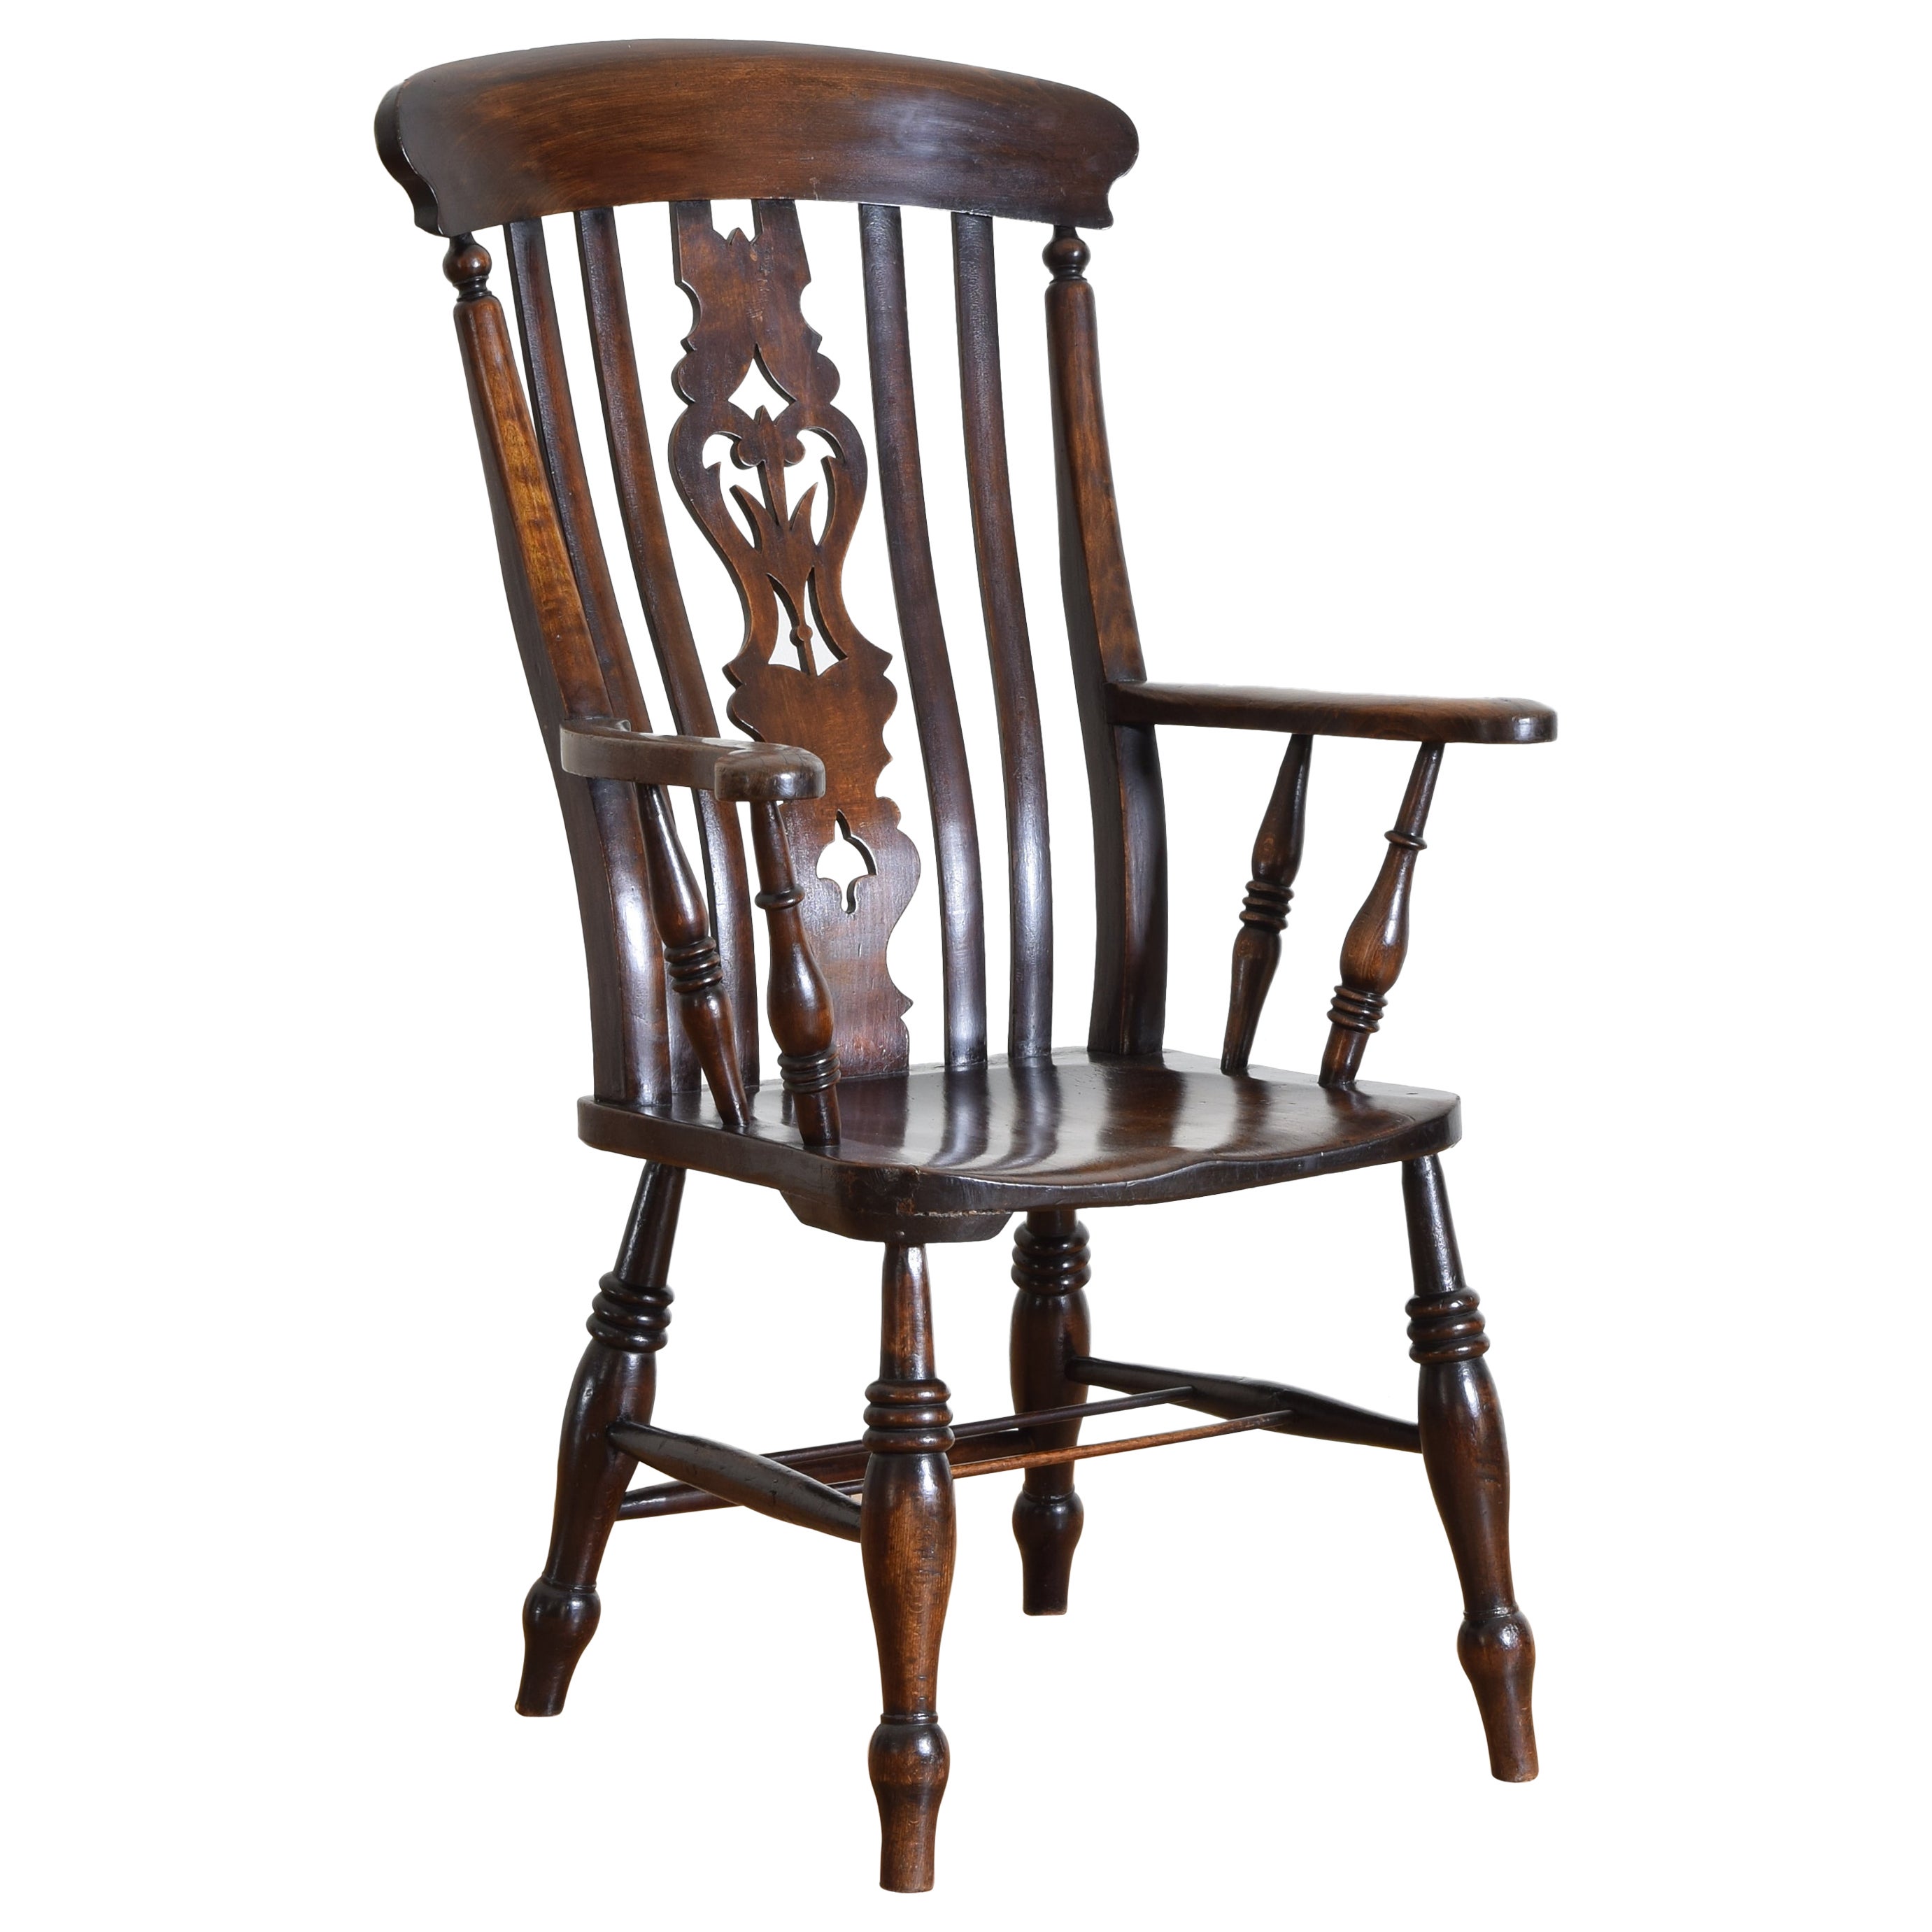 English Yew Wood Windsor Armchair, Late 1st quarter 19th century For Sale